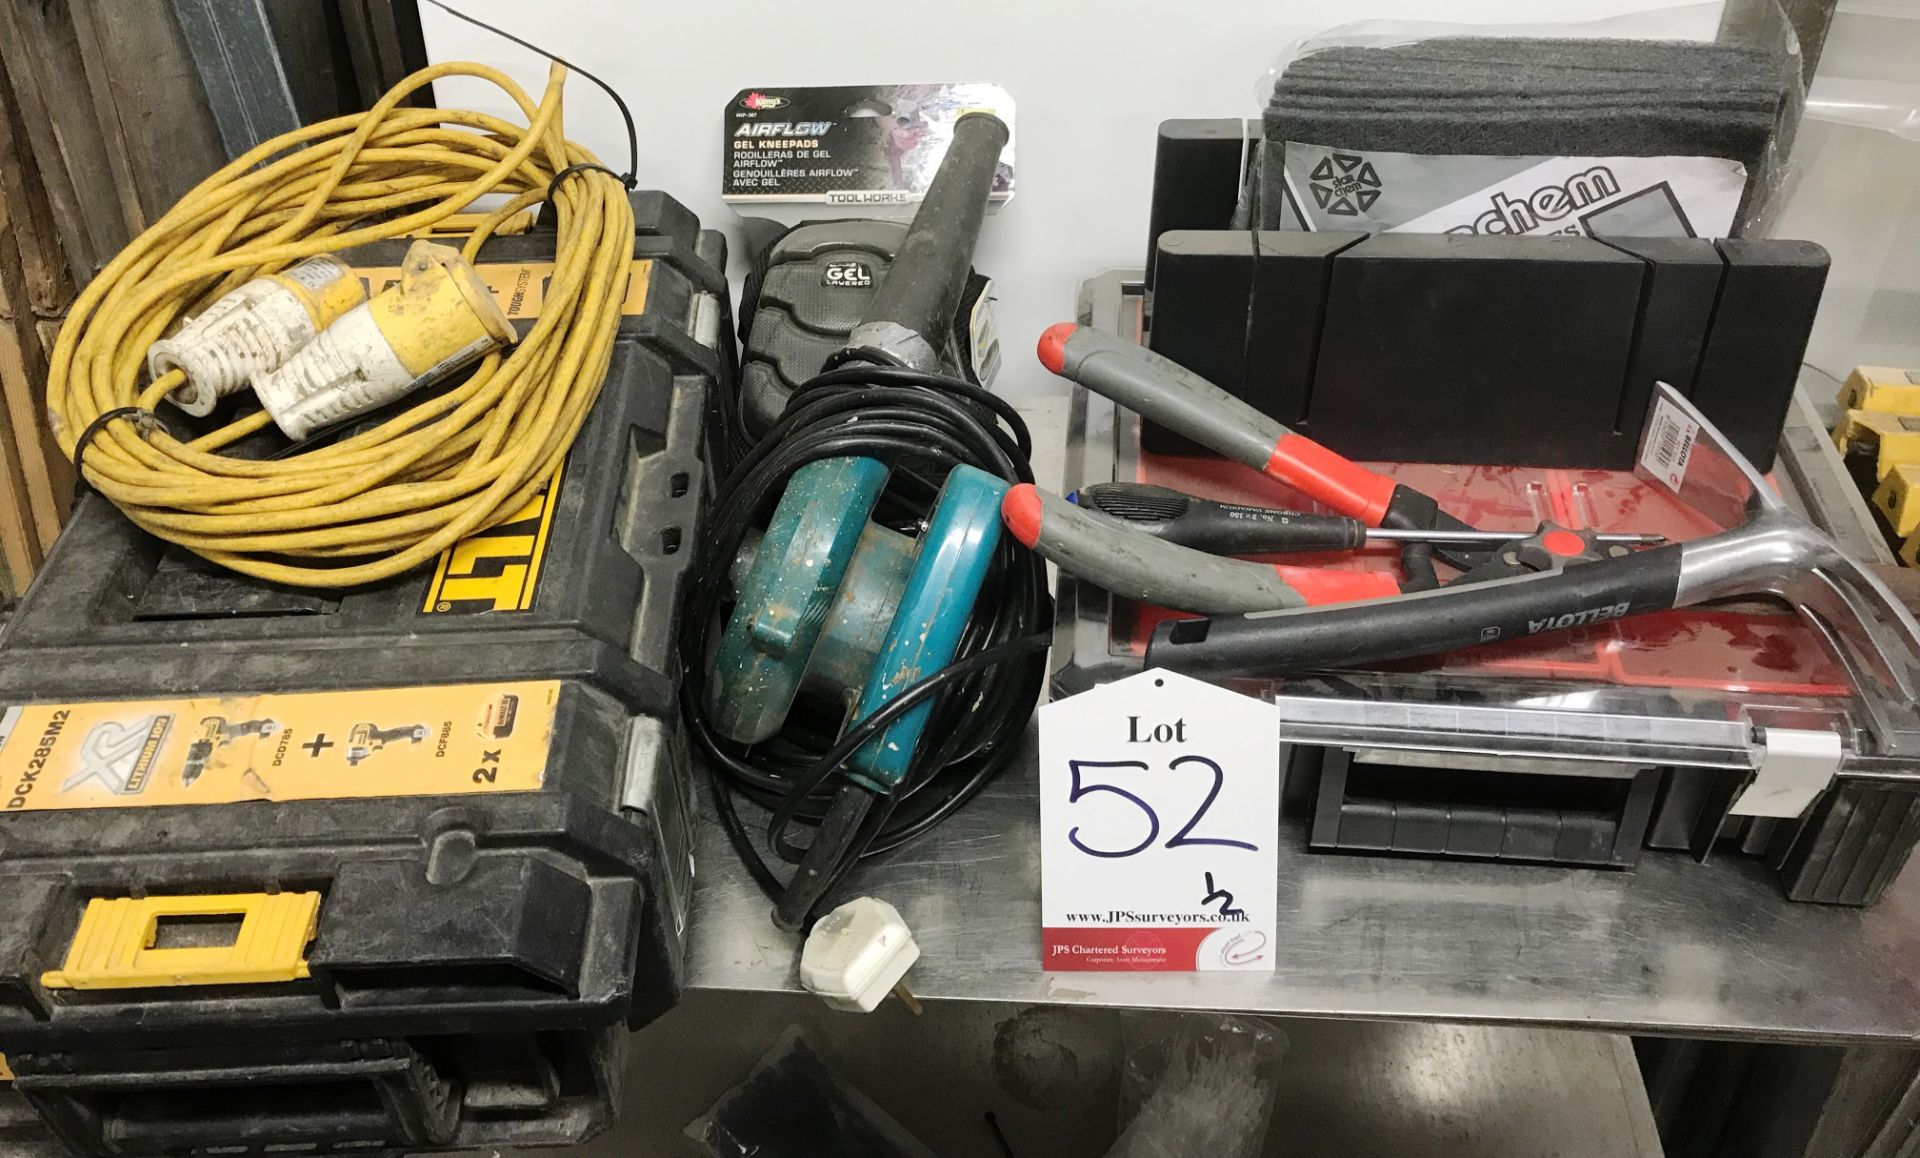 Mixed lot of various hand and power tools and equipment - as pictured